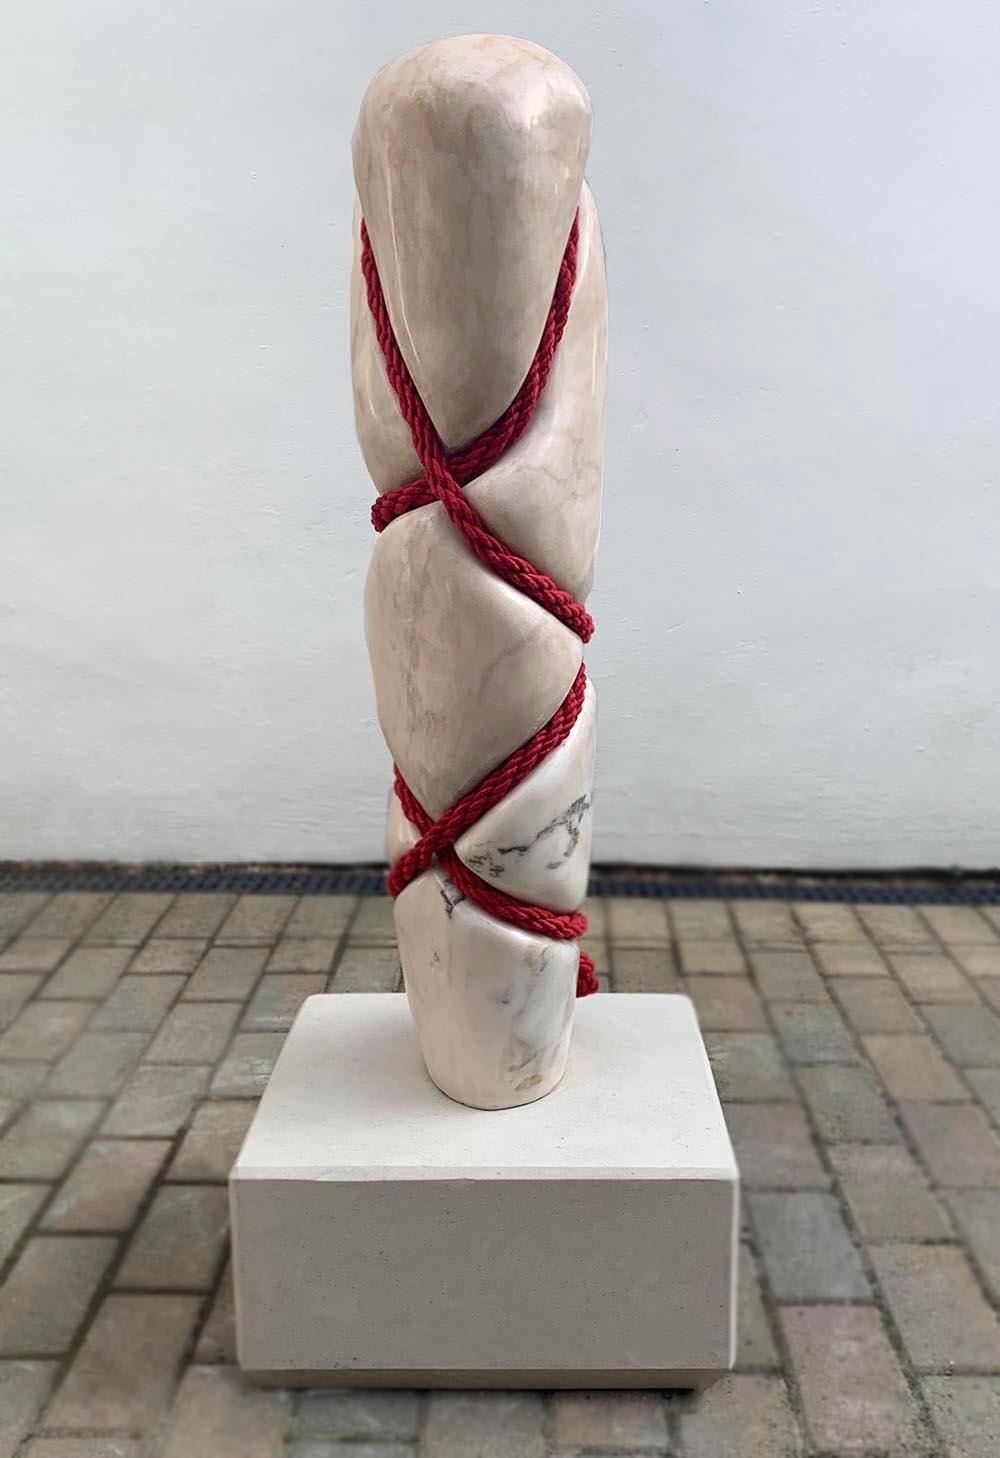 Portuguese rosa marble, rope and copper on Portland limestone, 105 cm × 38 cm × 40 cm.
The above dimensions include the base, which is attached. 
Dimensions of the base: H 20 x L 38 x D 40 cm
Unique work delivered with a certificate of authenticity.